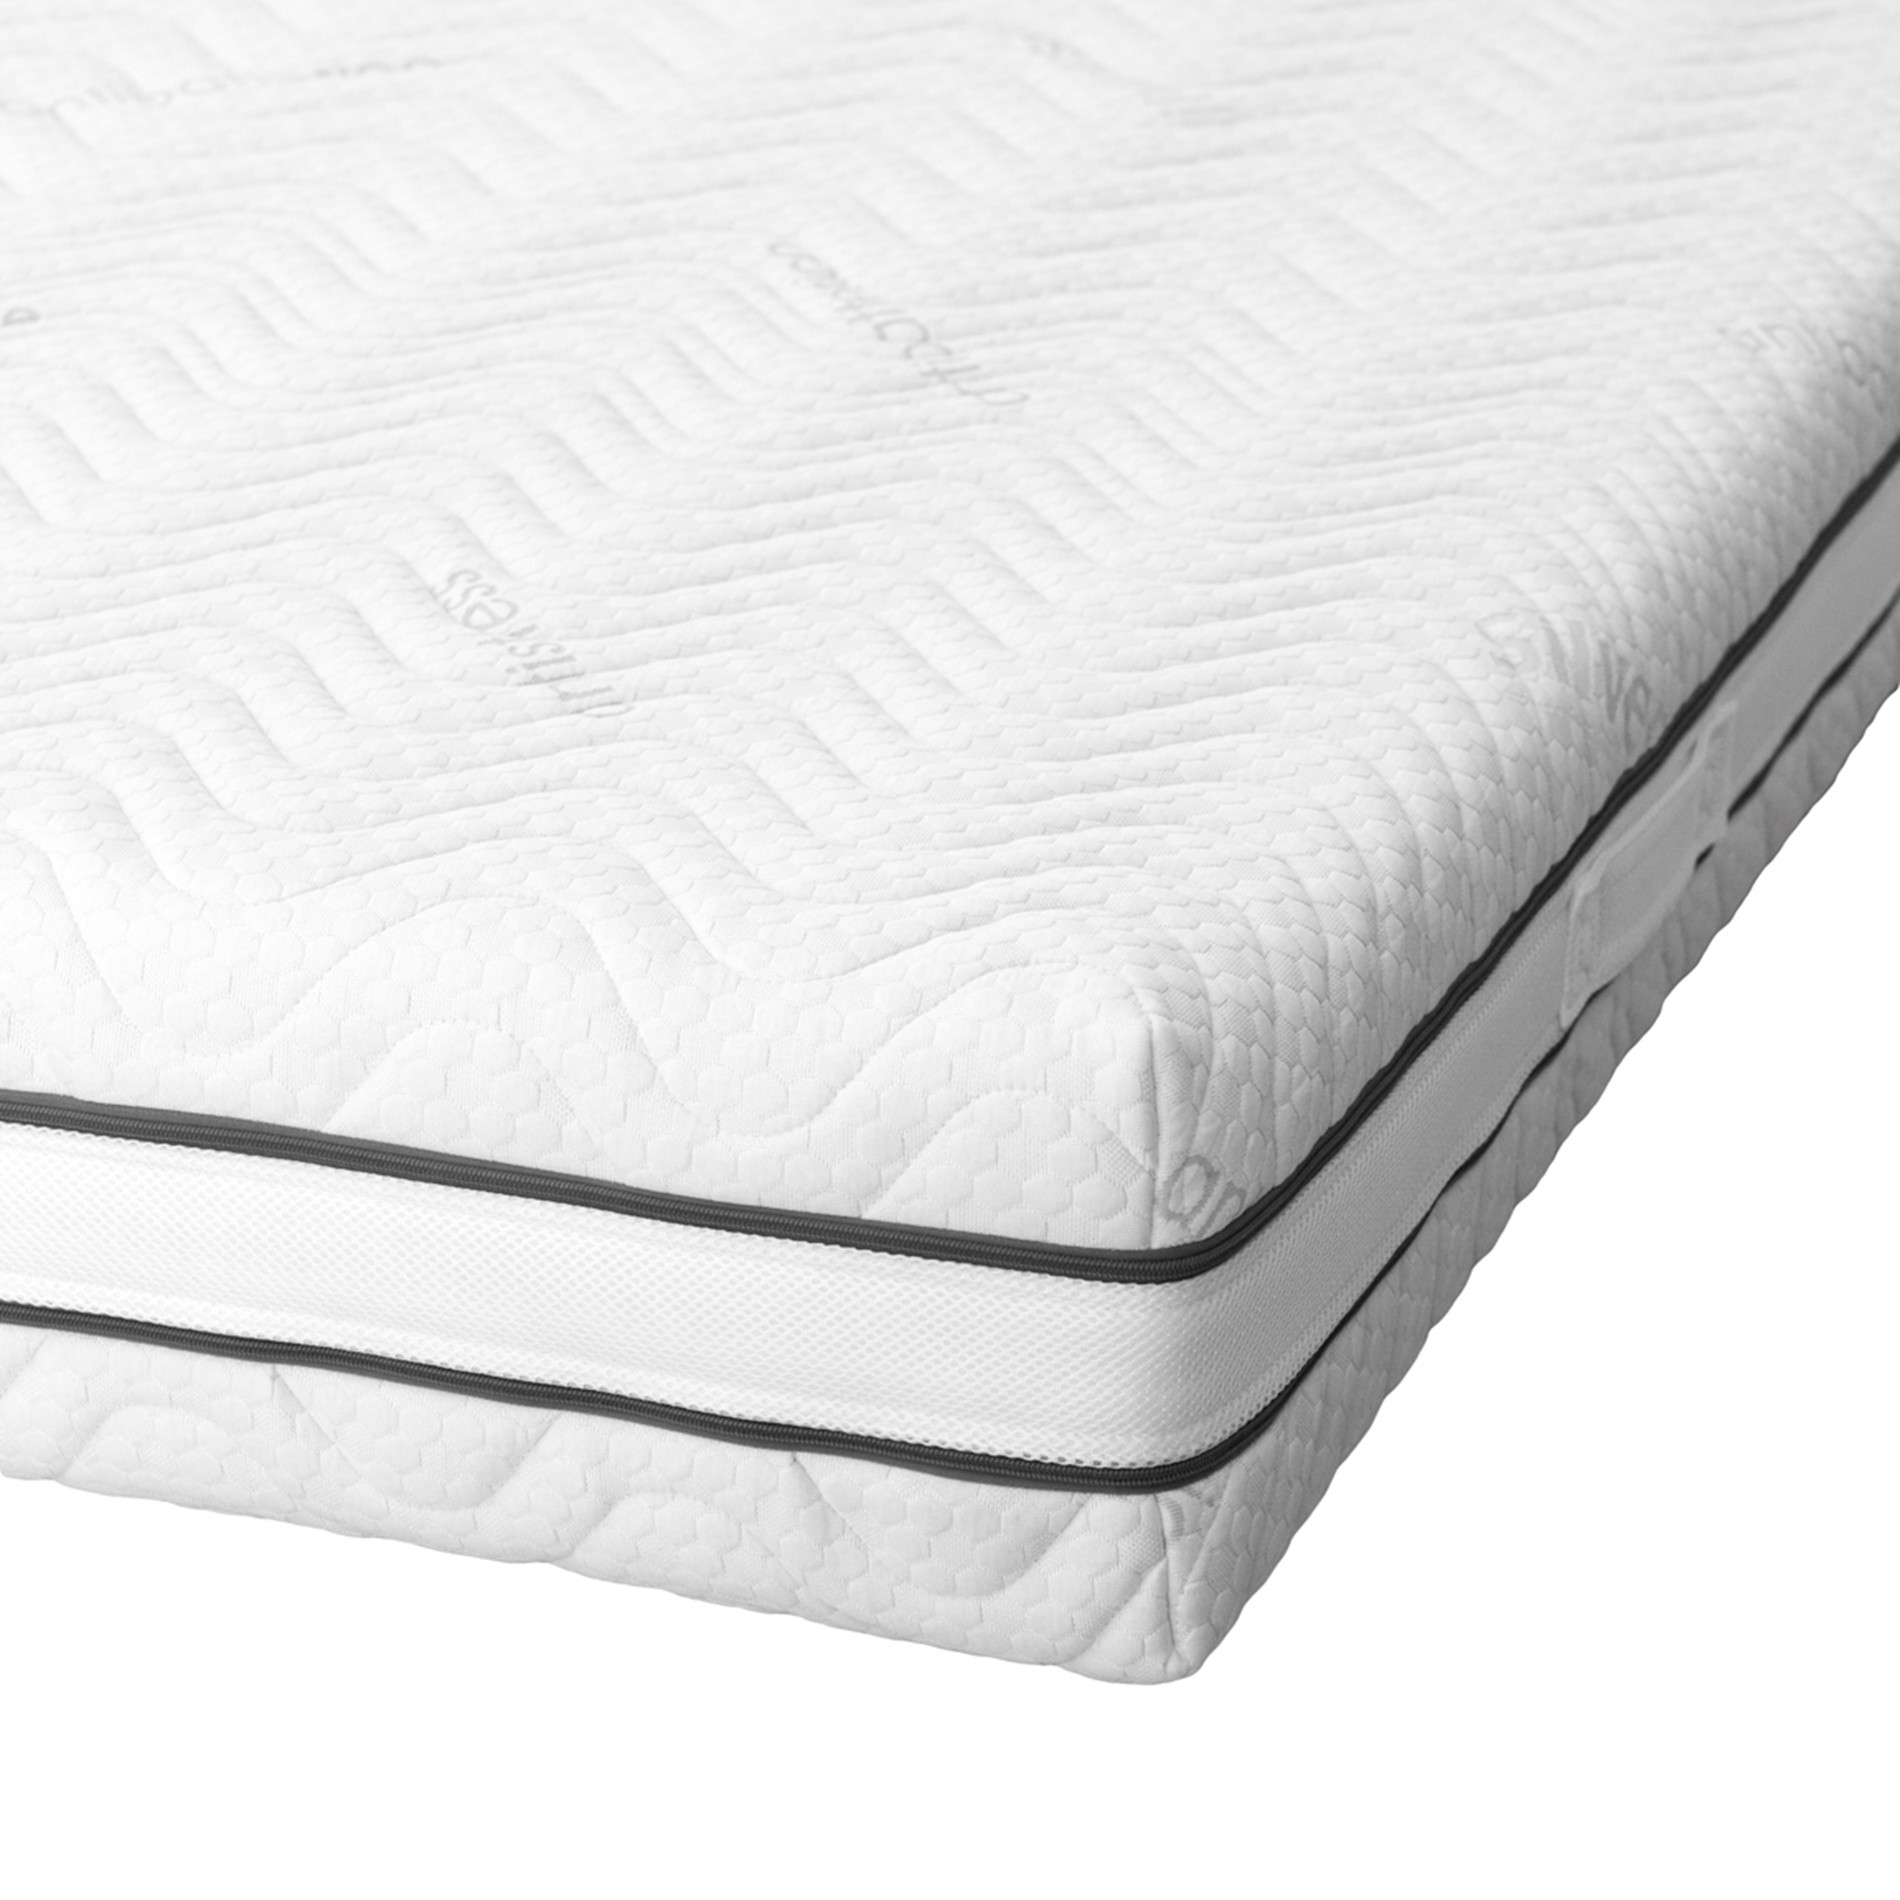 Two-season mattress with removable cover, White, large image number 2